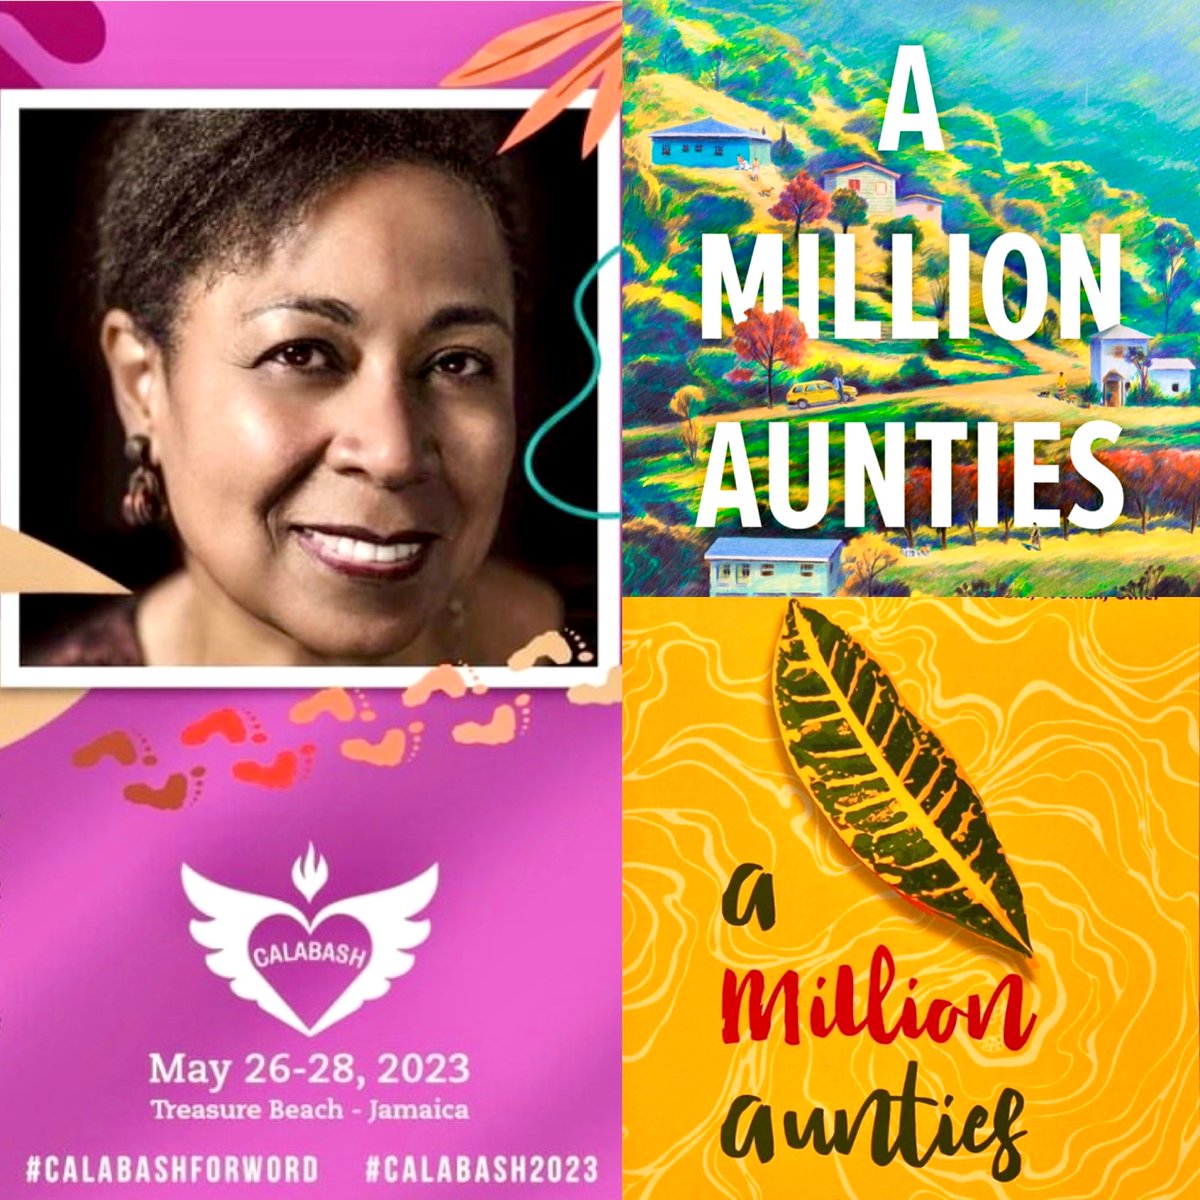 Calling all ‘aunties’, their friends & relatives:

The Calabash International Literary Festival takes place May 26-28. Rendez-vous Treasure Beach.

#calabashforword #calabash2023 #Jamaica #books #reading #writing